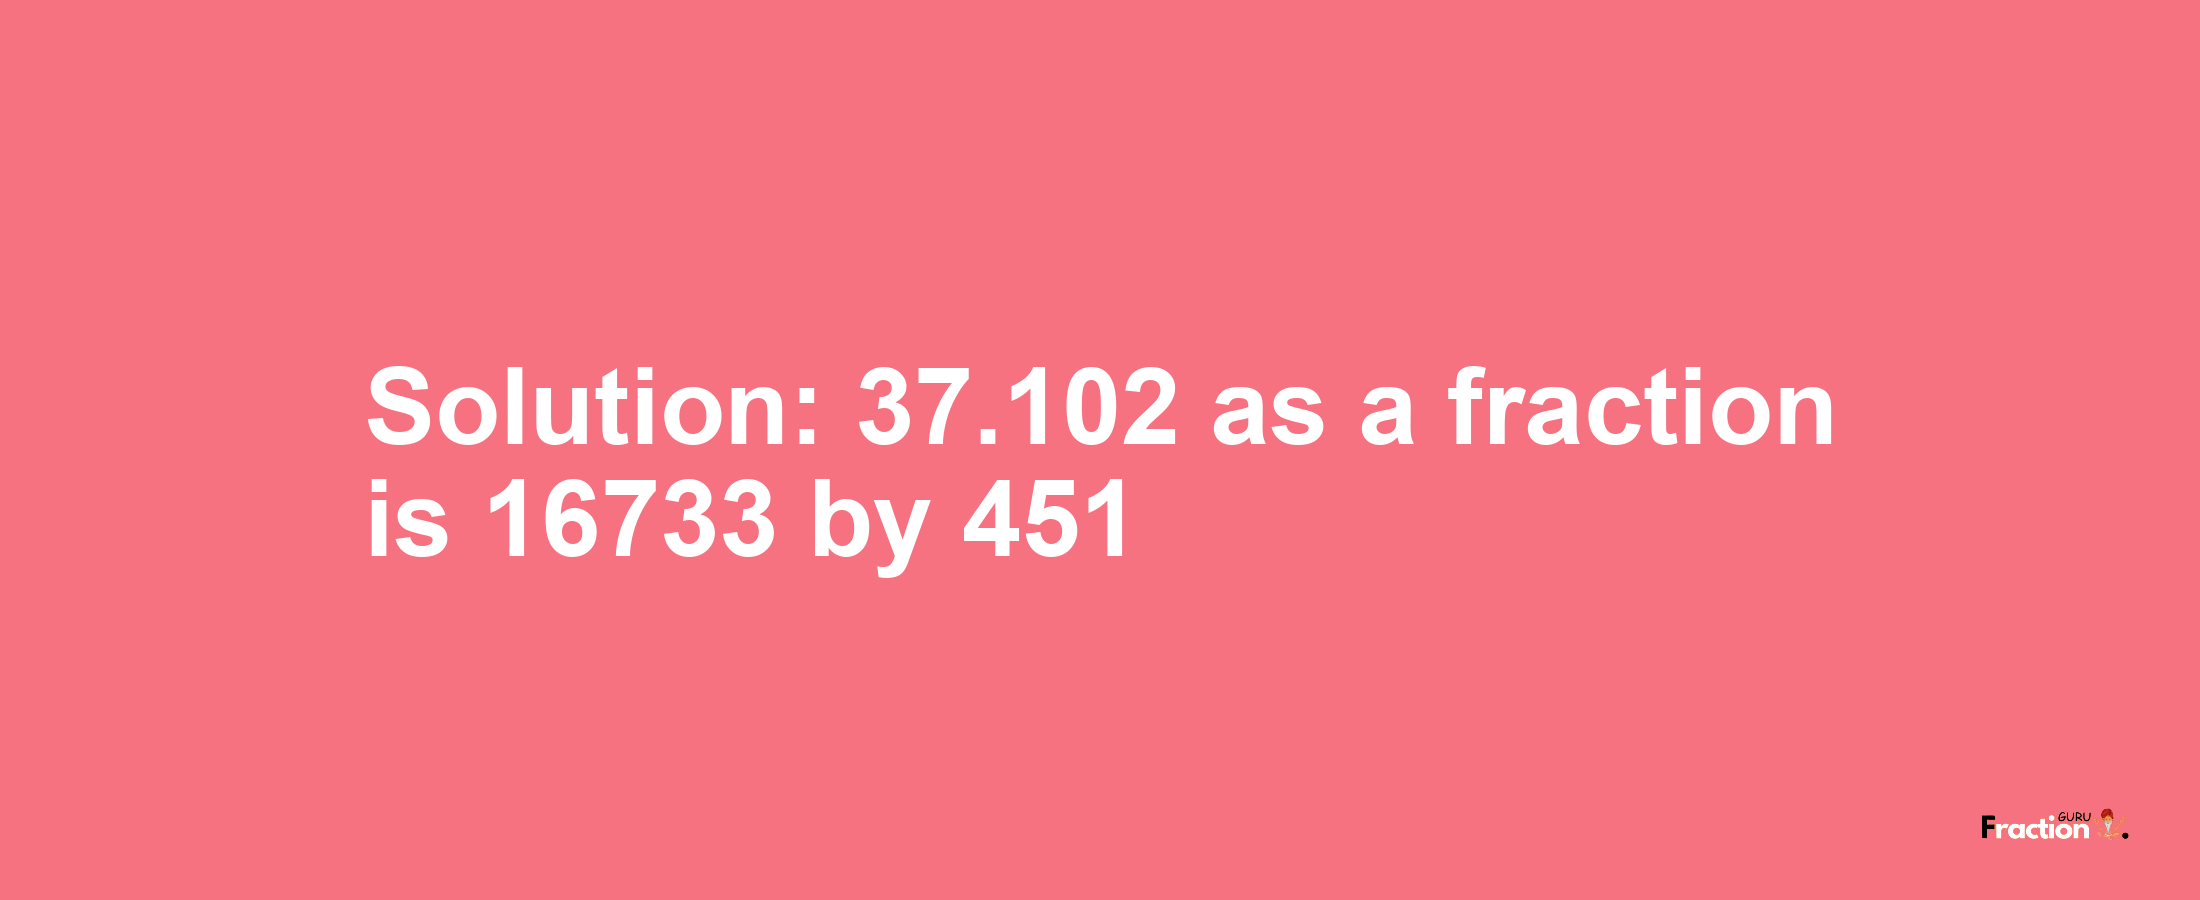 Solution:37.102 as a fraction is 16733/451